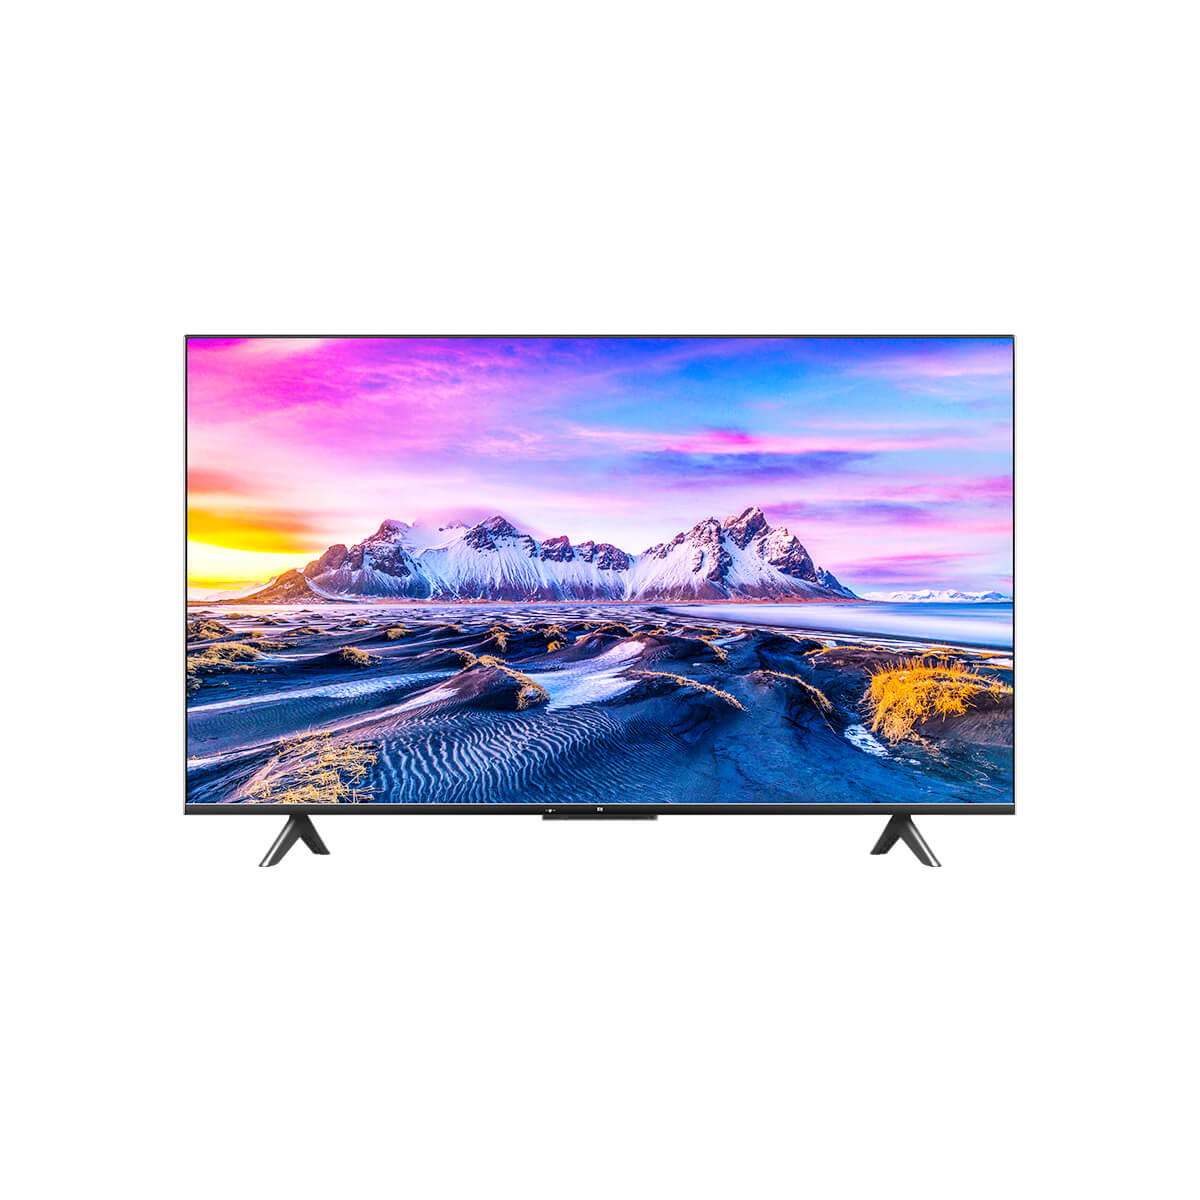 EPSOON 55 inch Android TV